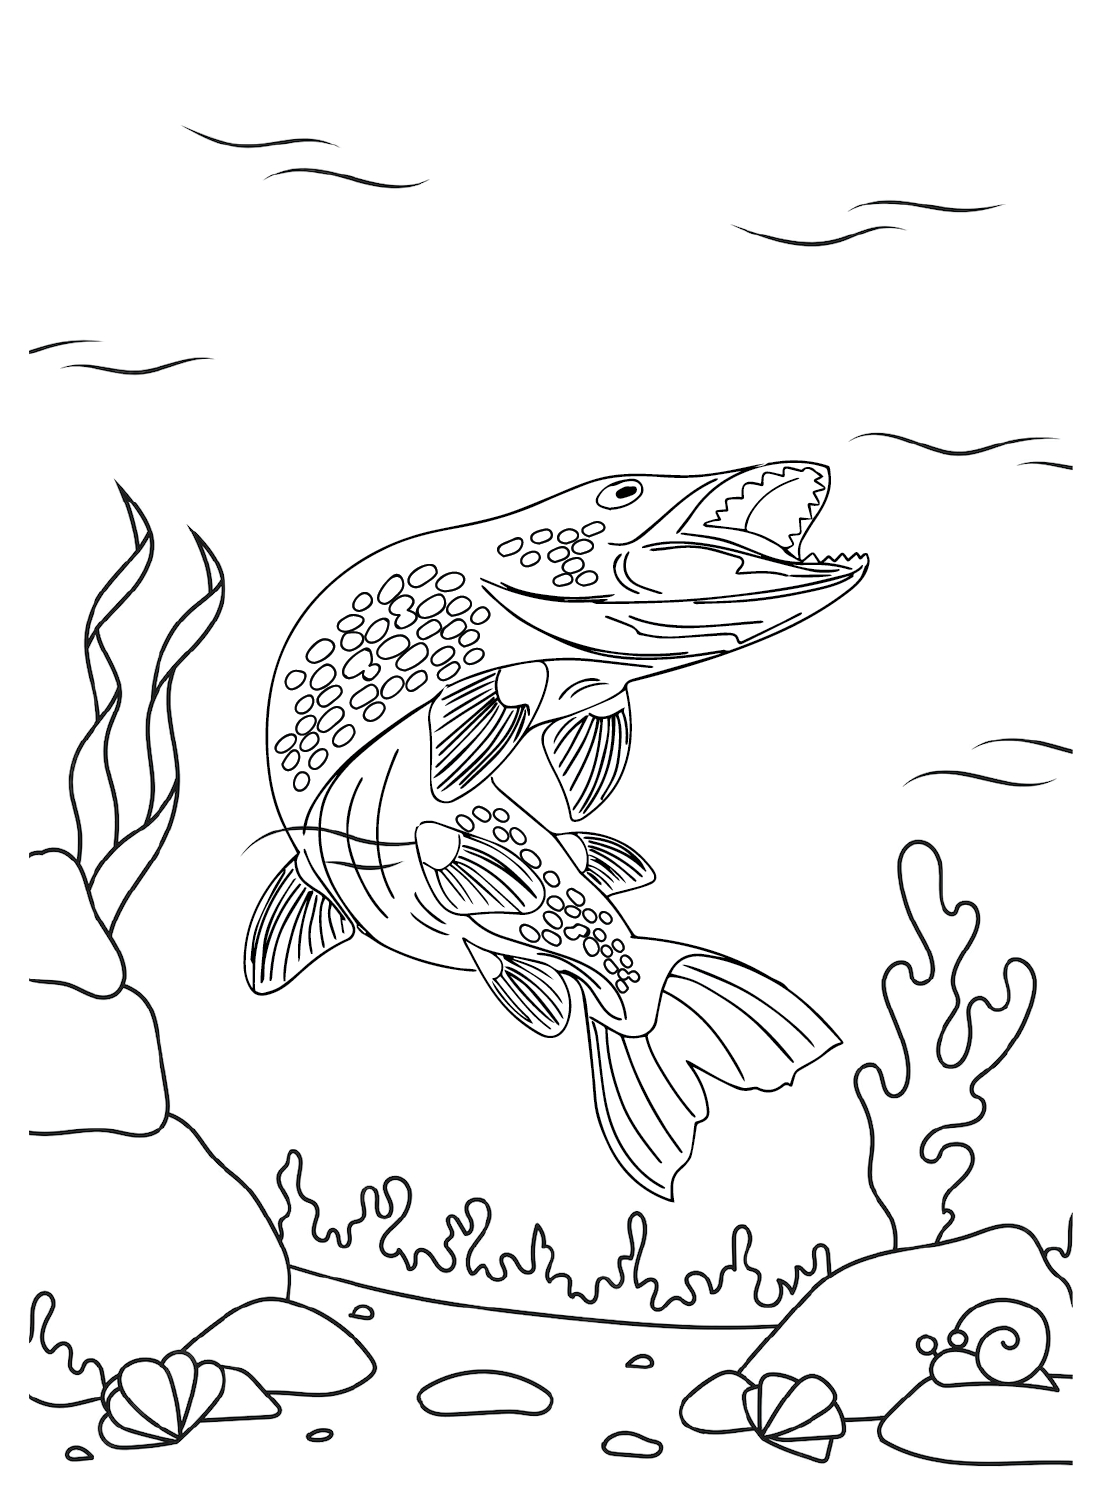 Pictures Pike Coloring Page - Free Printable Coloring Pages